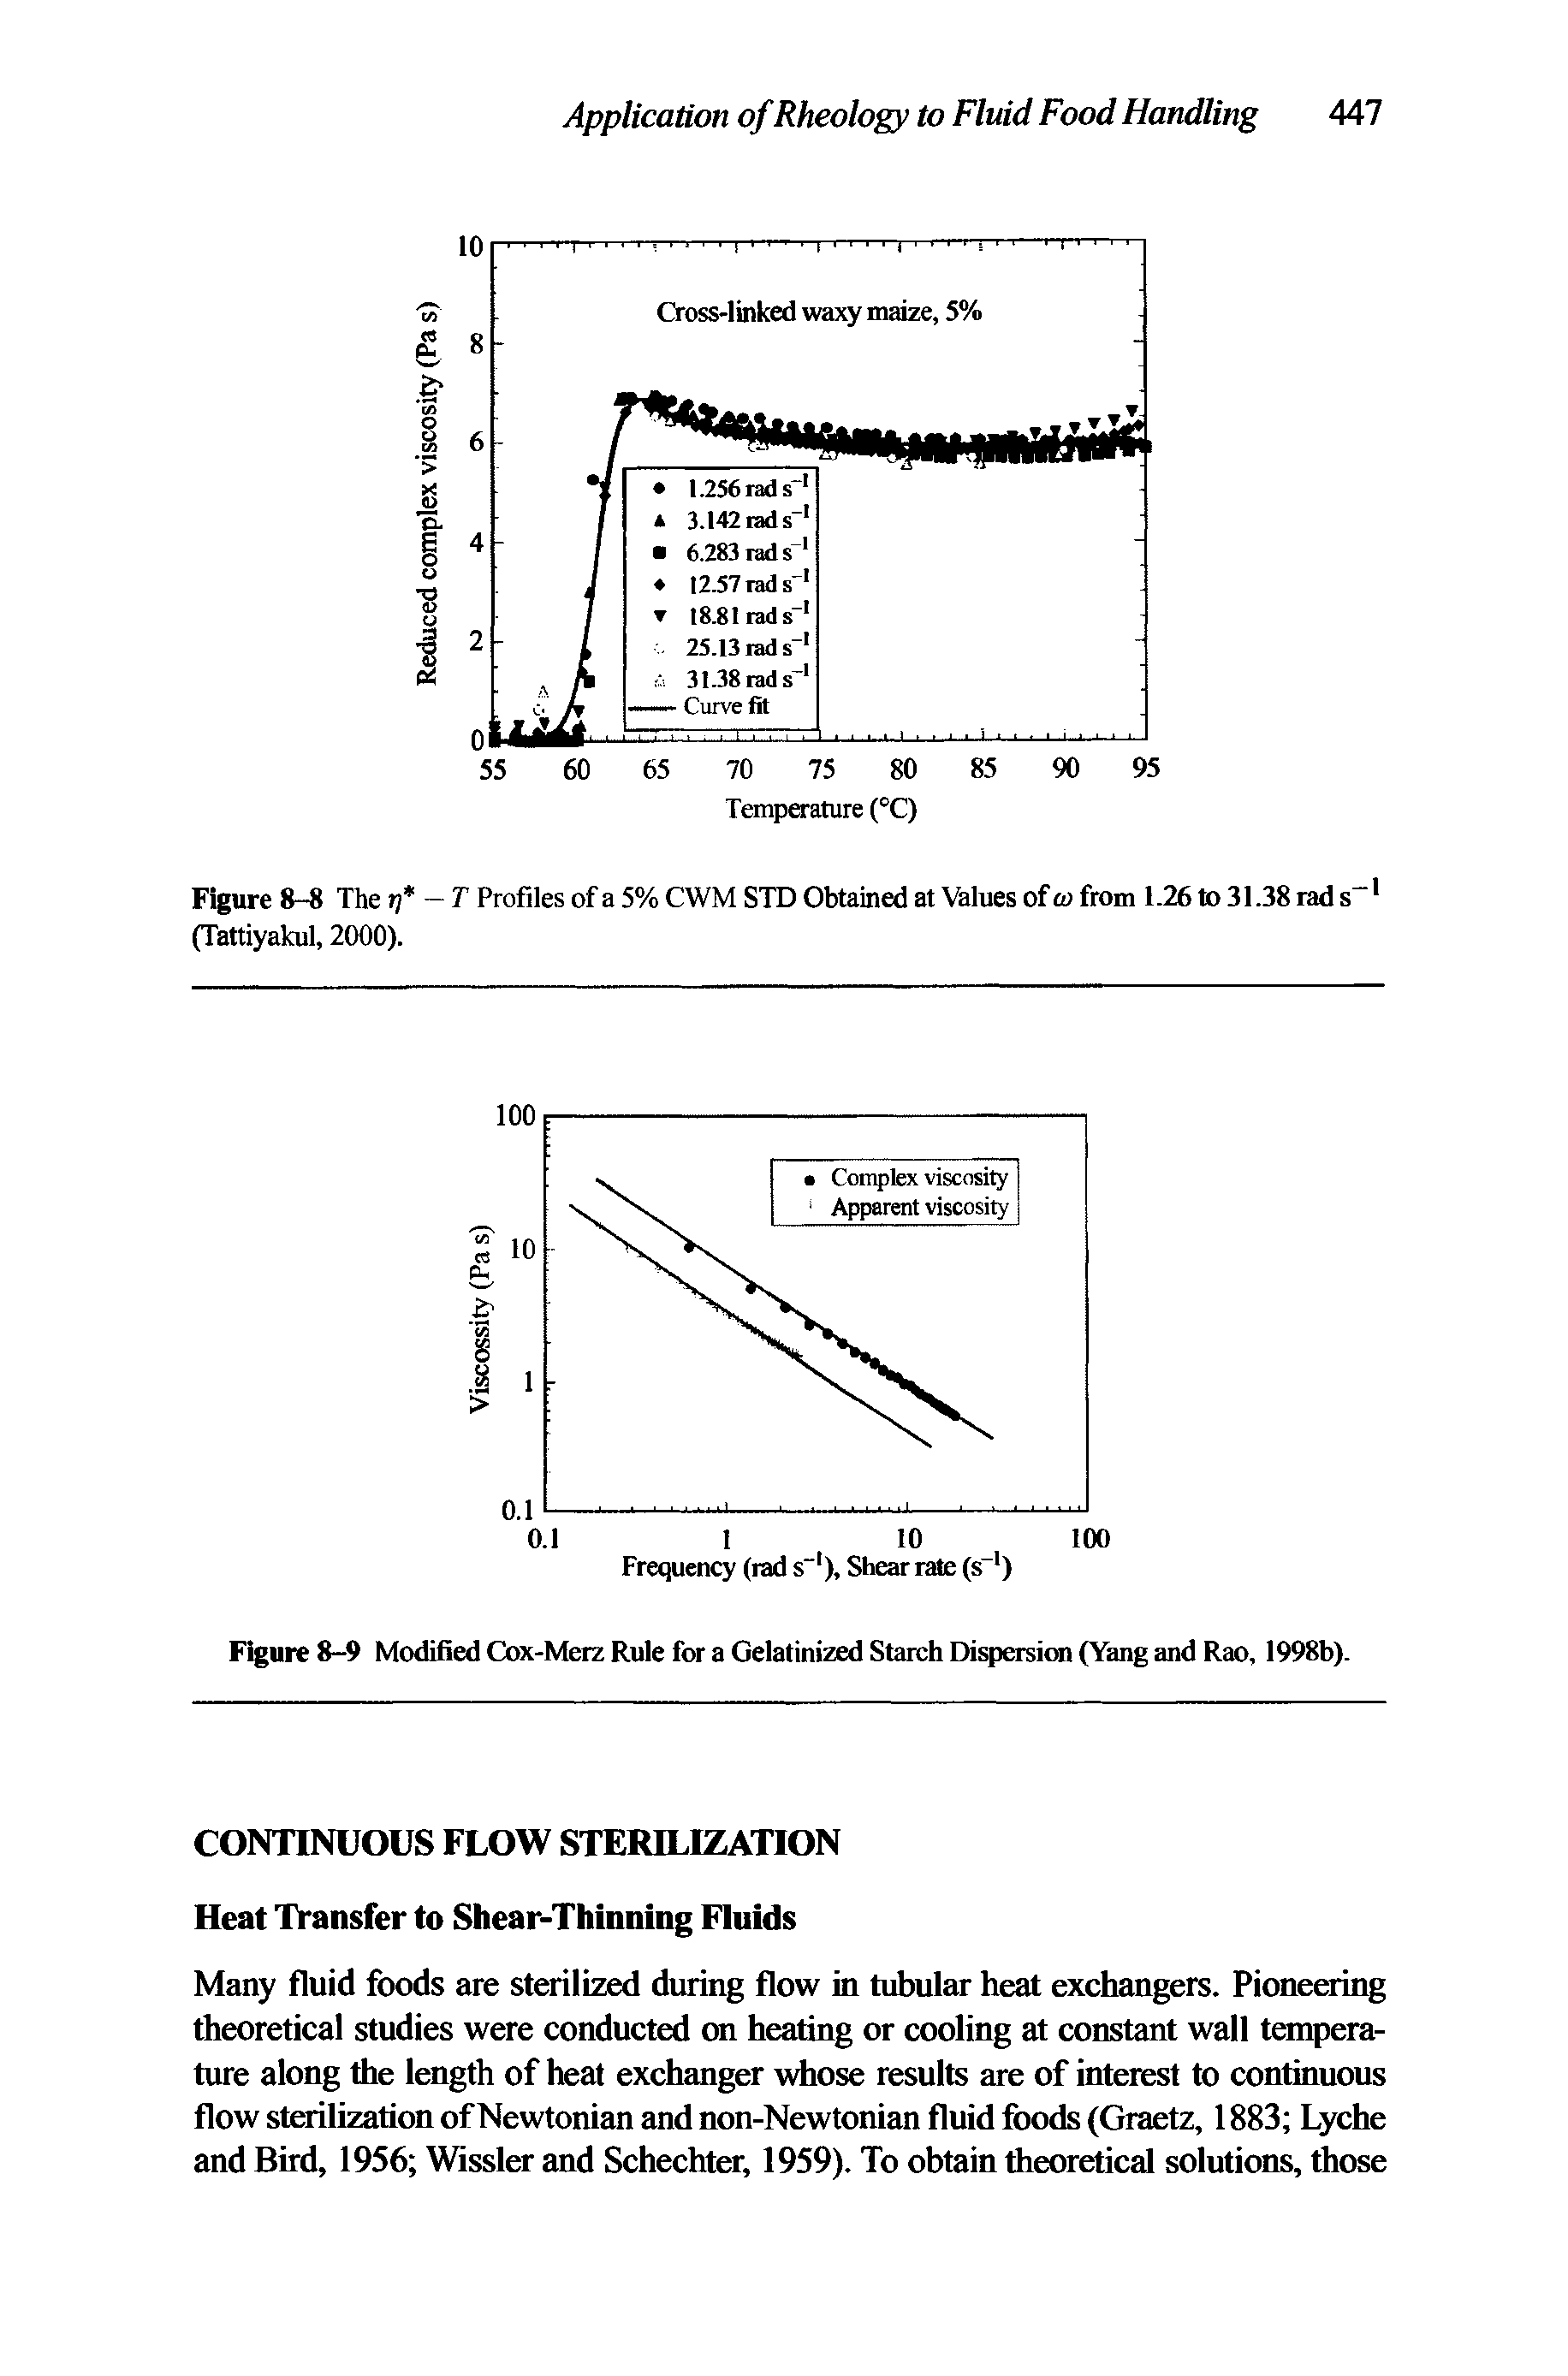 Figure 8-9 Modified Cox-Merz Rule for a Gelatinized Starch Dispersion (Yang and Rao, 1998b).